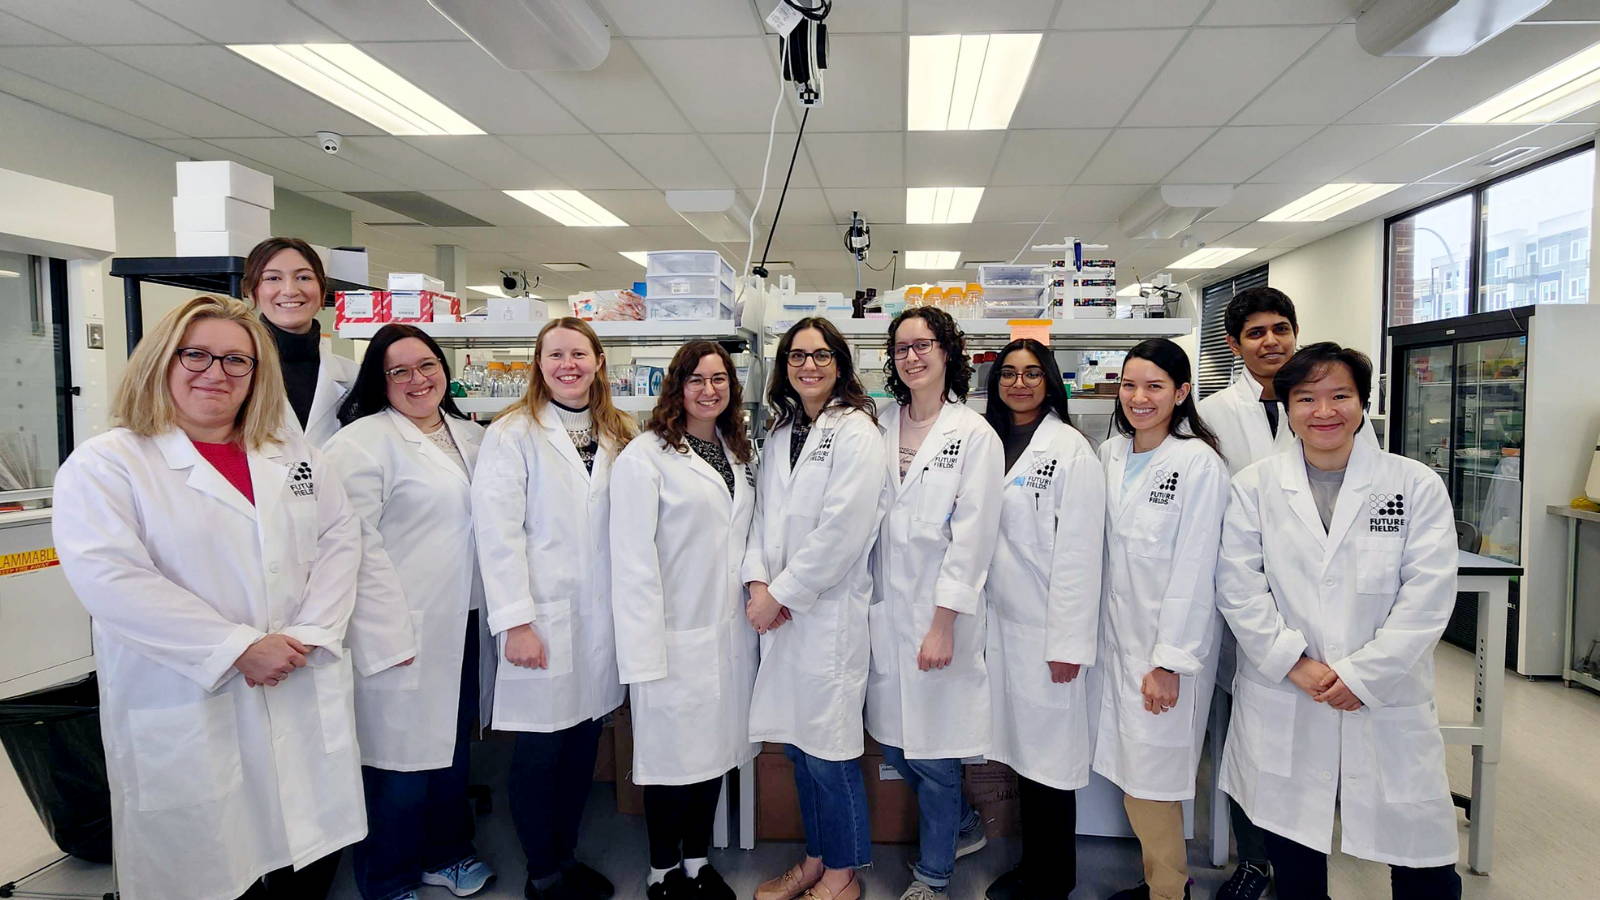 Future Fields makes ethical, bioactive growth factors for the sustainable scientist. We are proud supporters of women in STEM. Future Fields women scientists pose for a photo for International Day of Women and Girls in Science